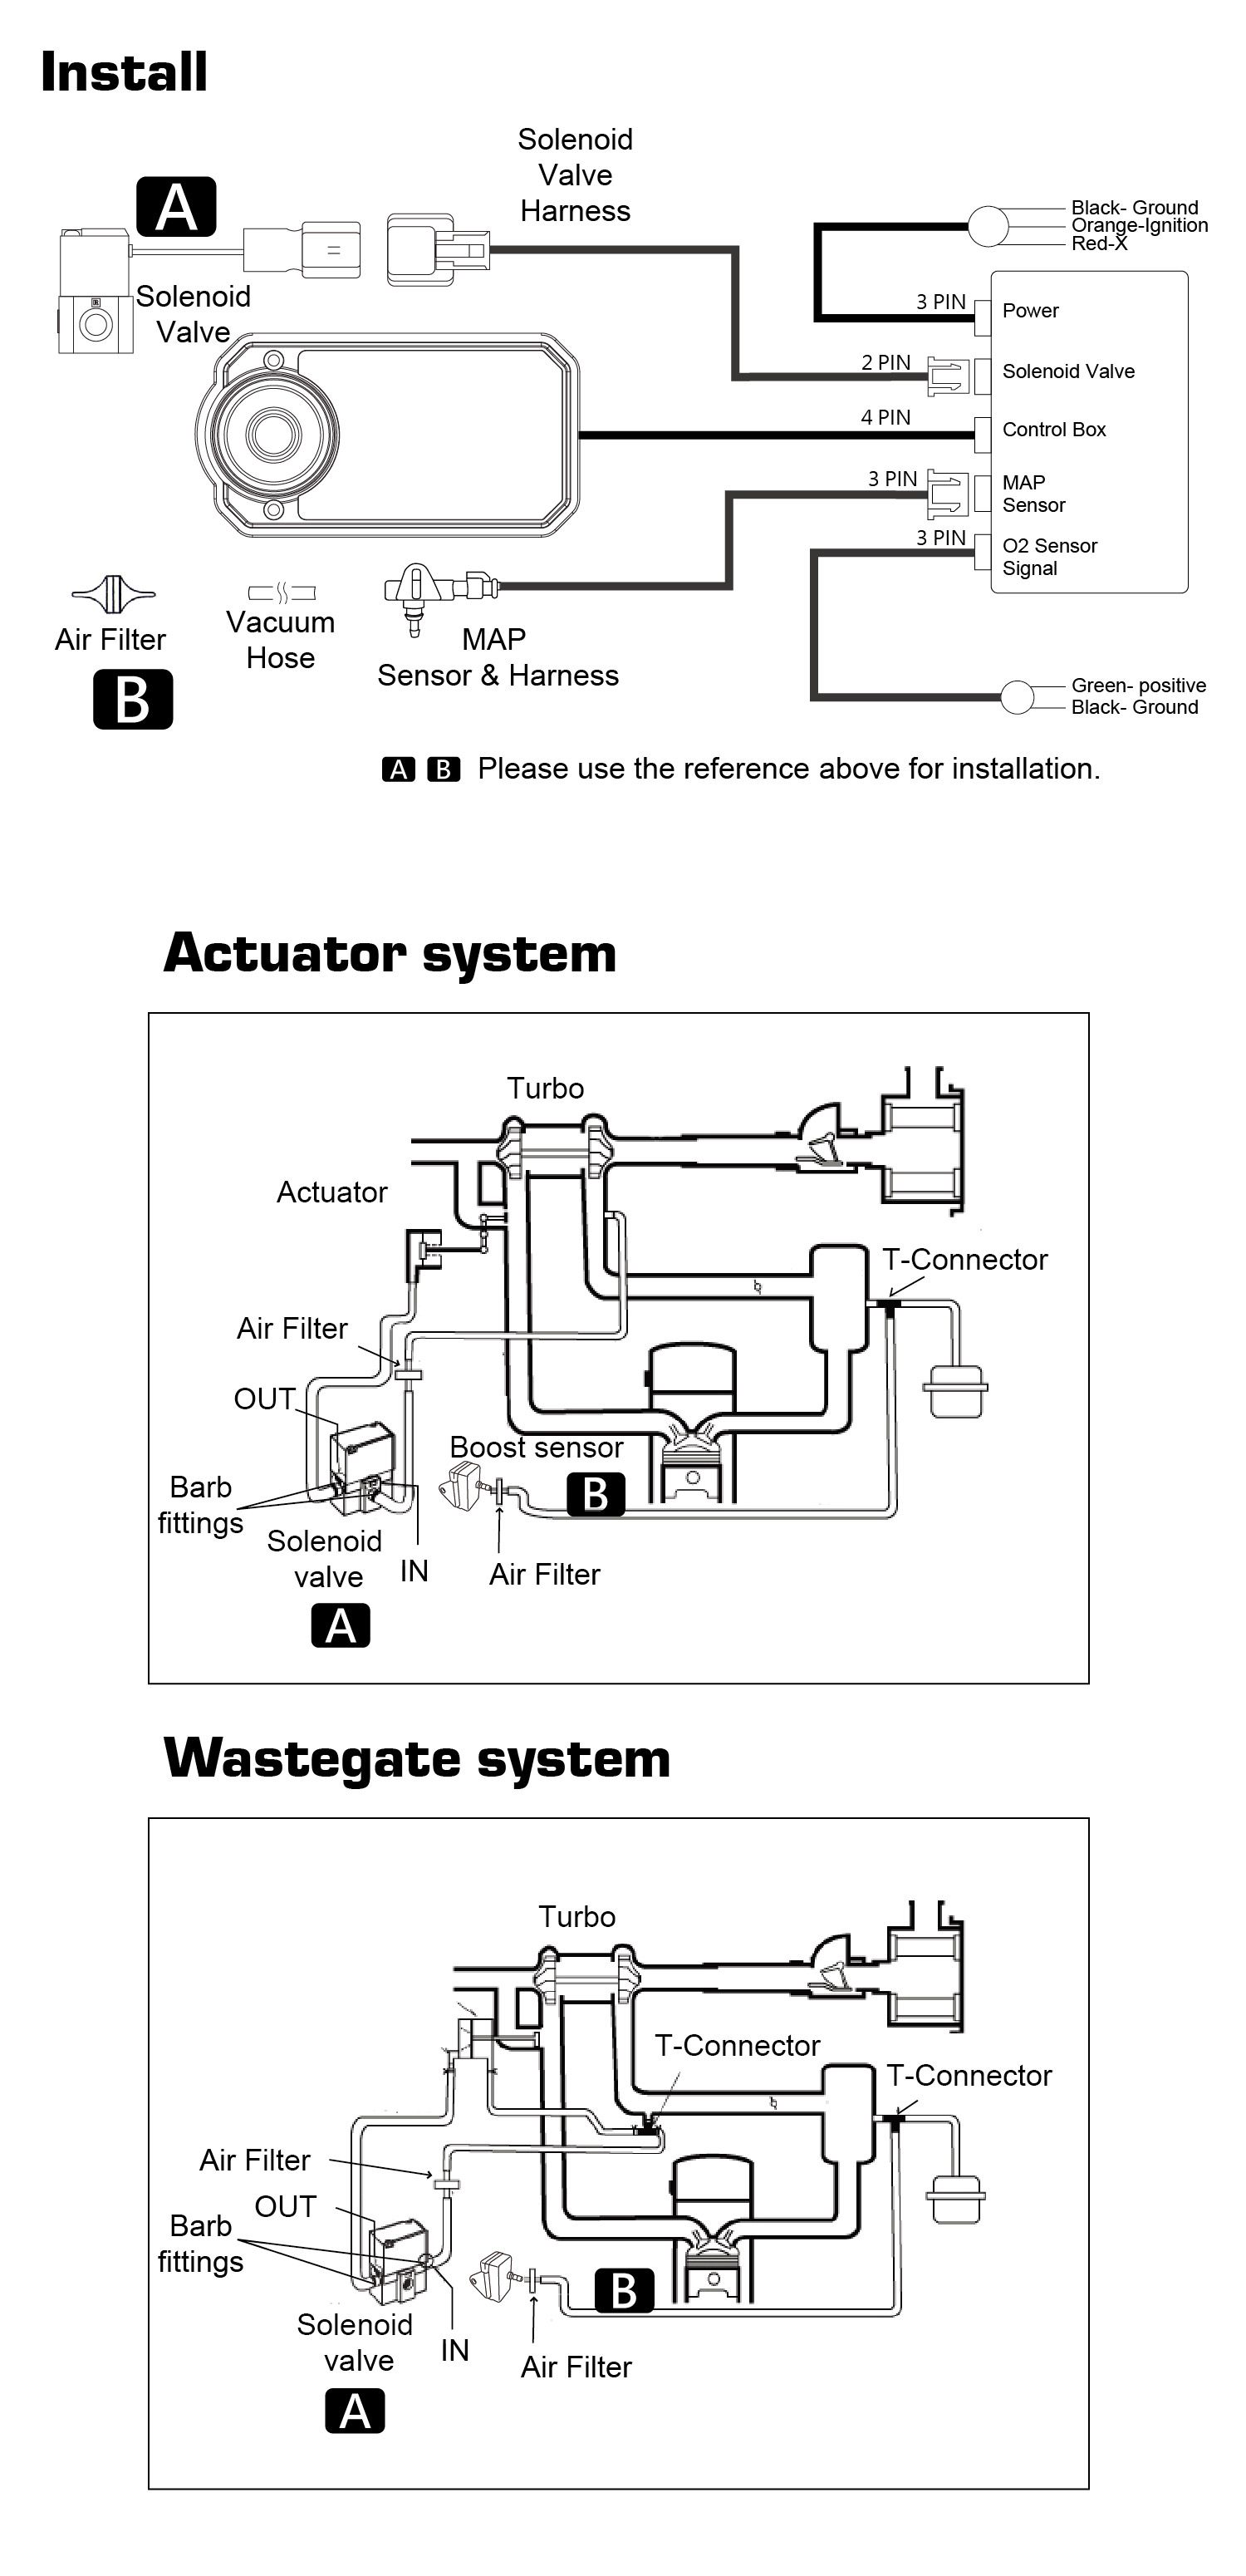 Divided into Actuator, Wastegate two systems.